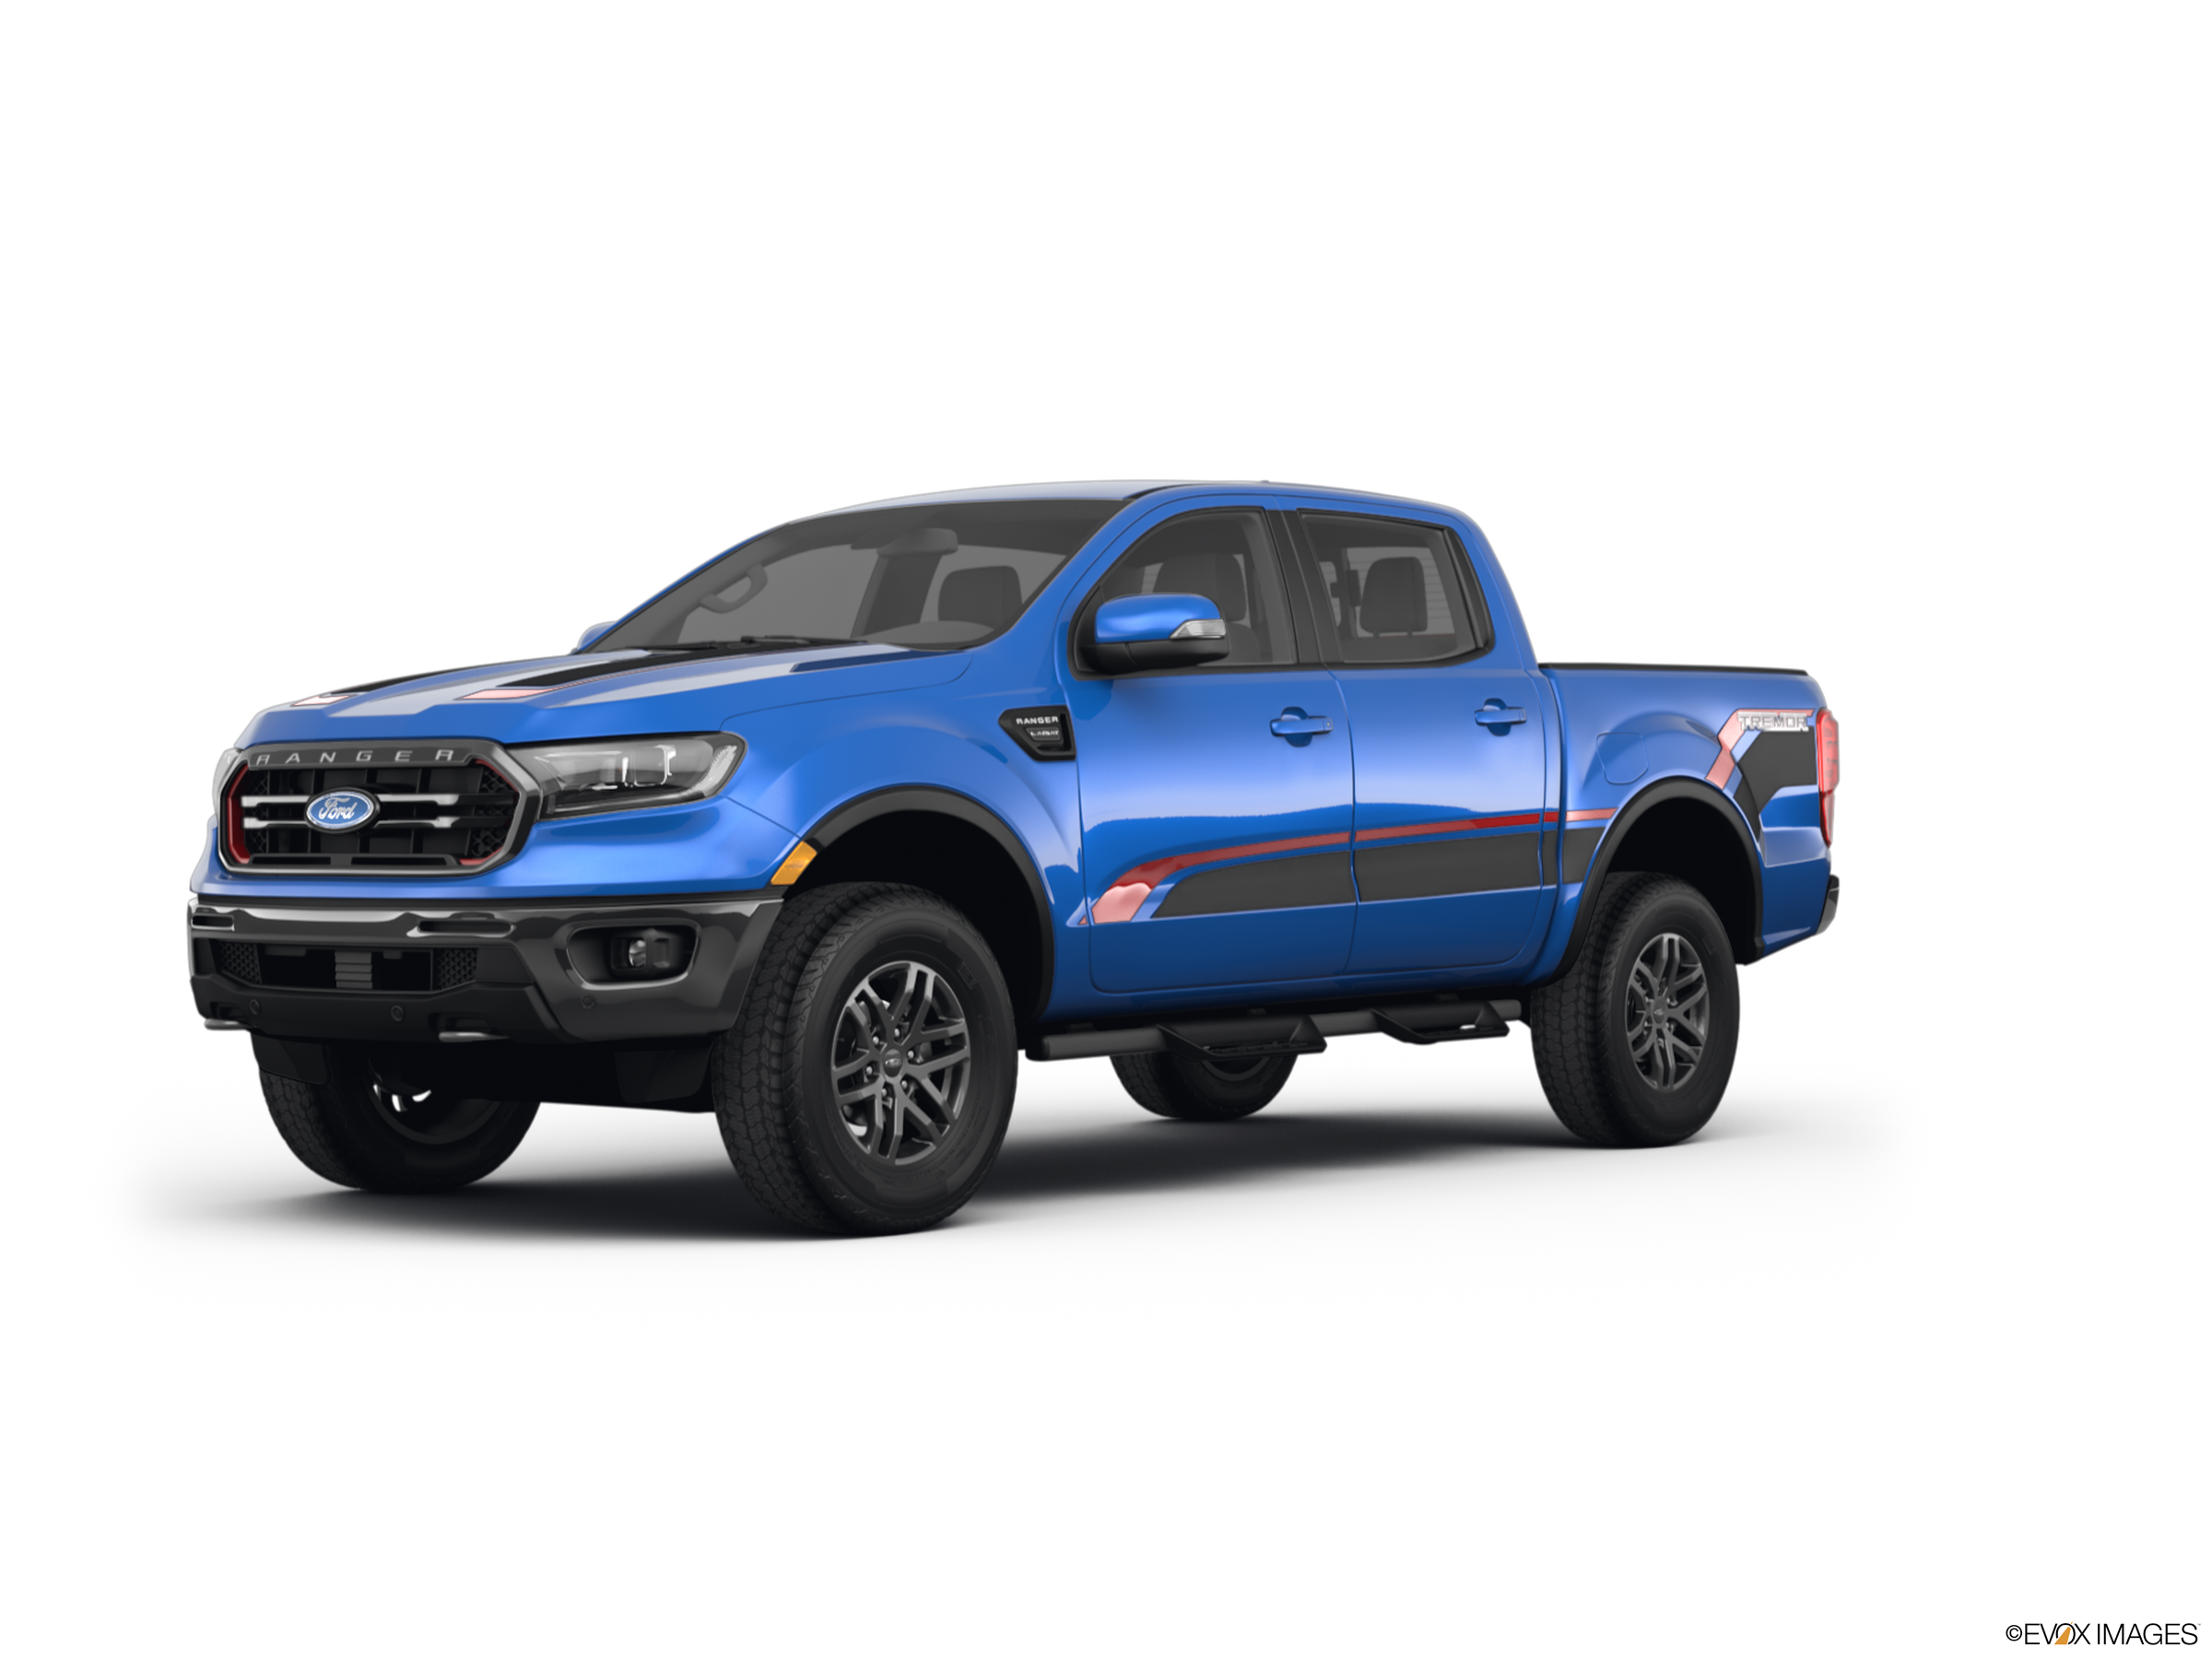 2023 Ford Ranger Prices, Reviews, and Photos - MotorTrend